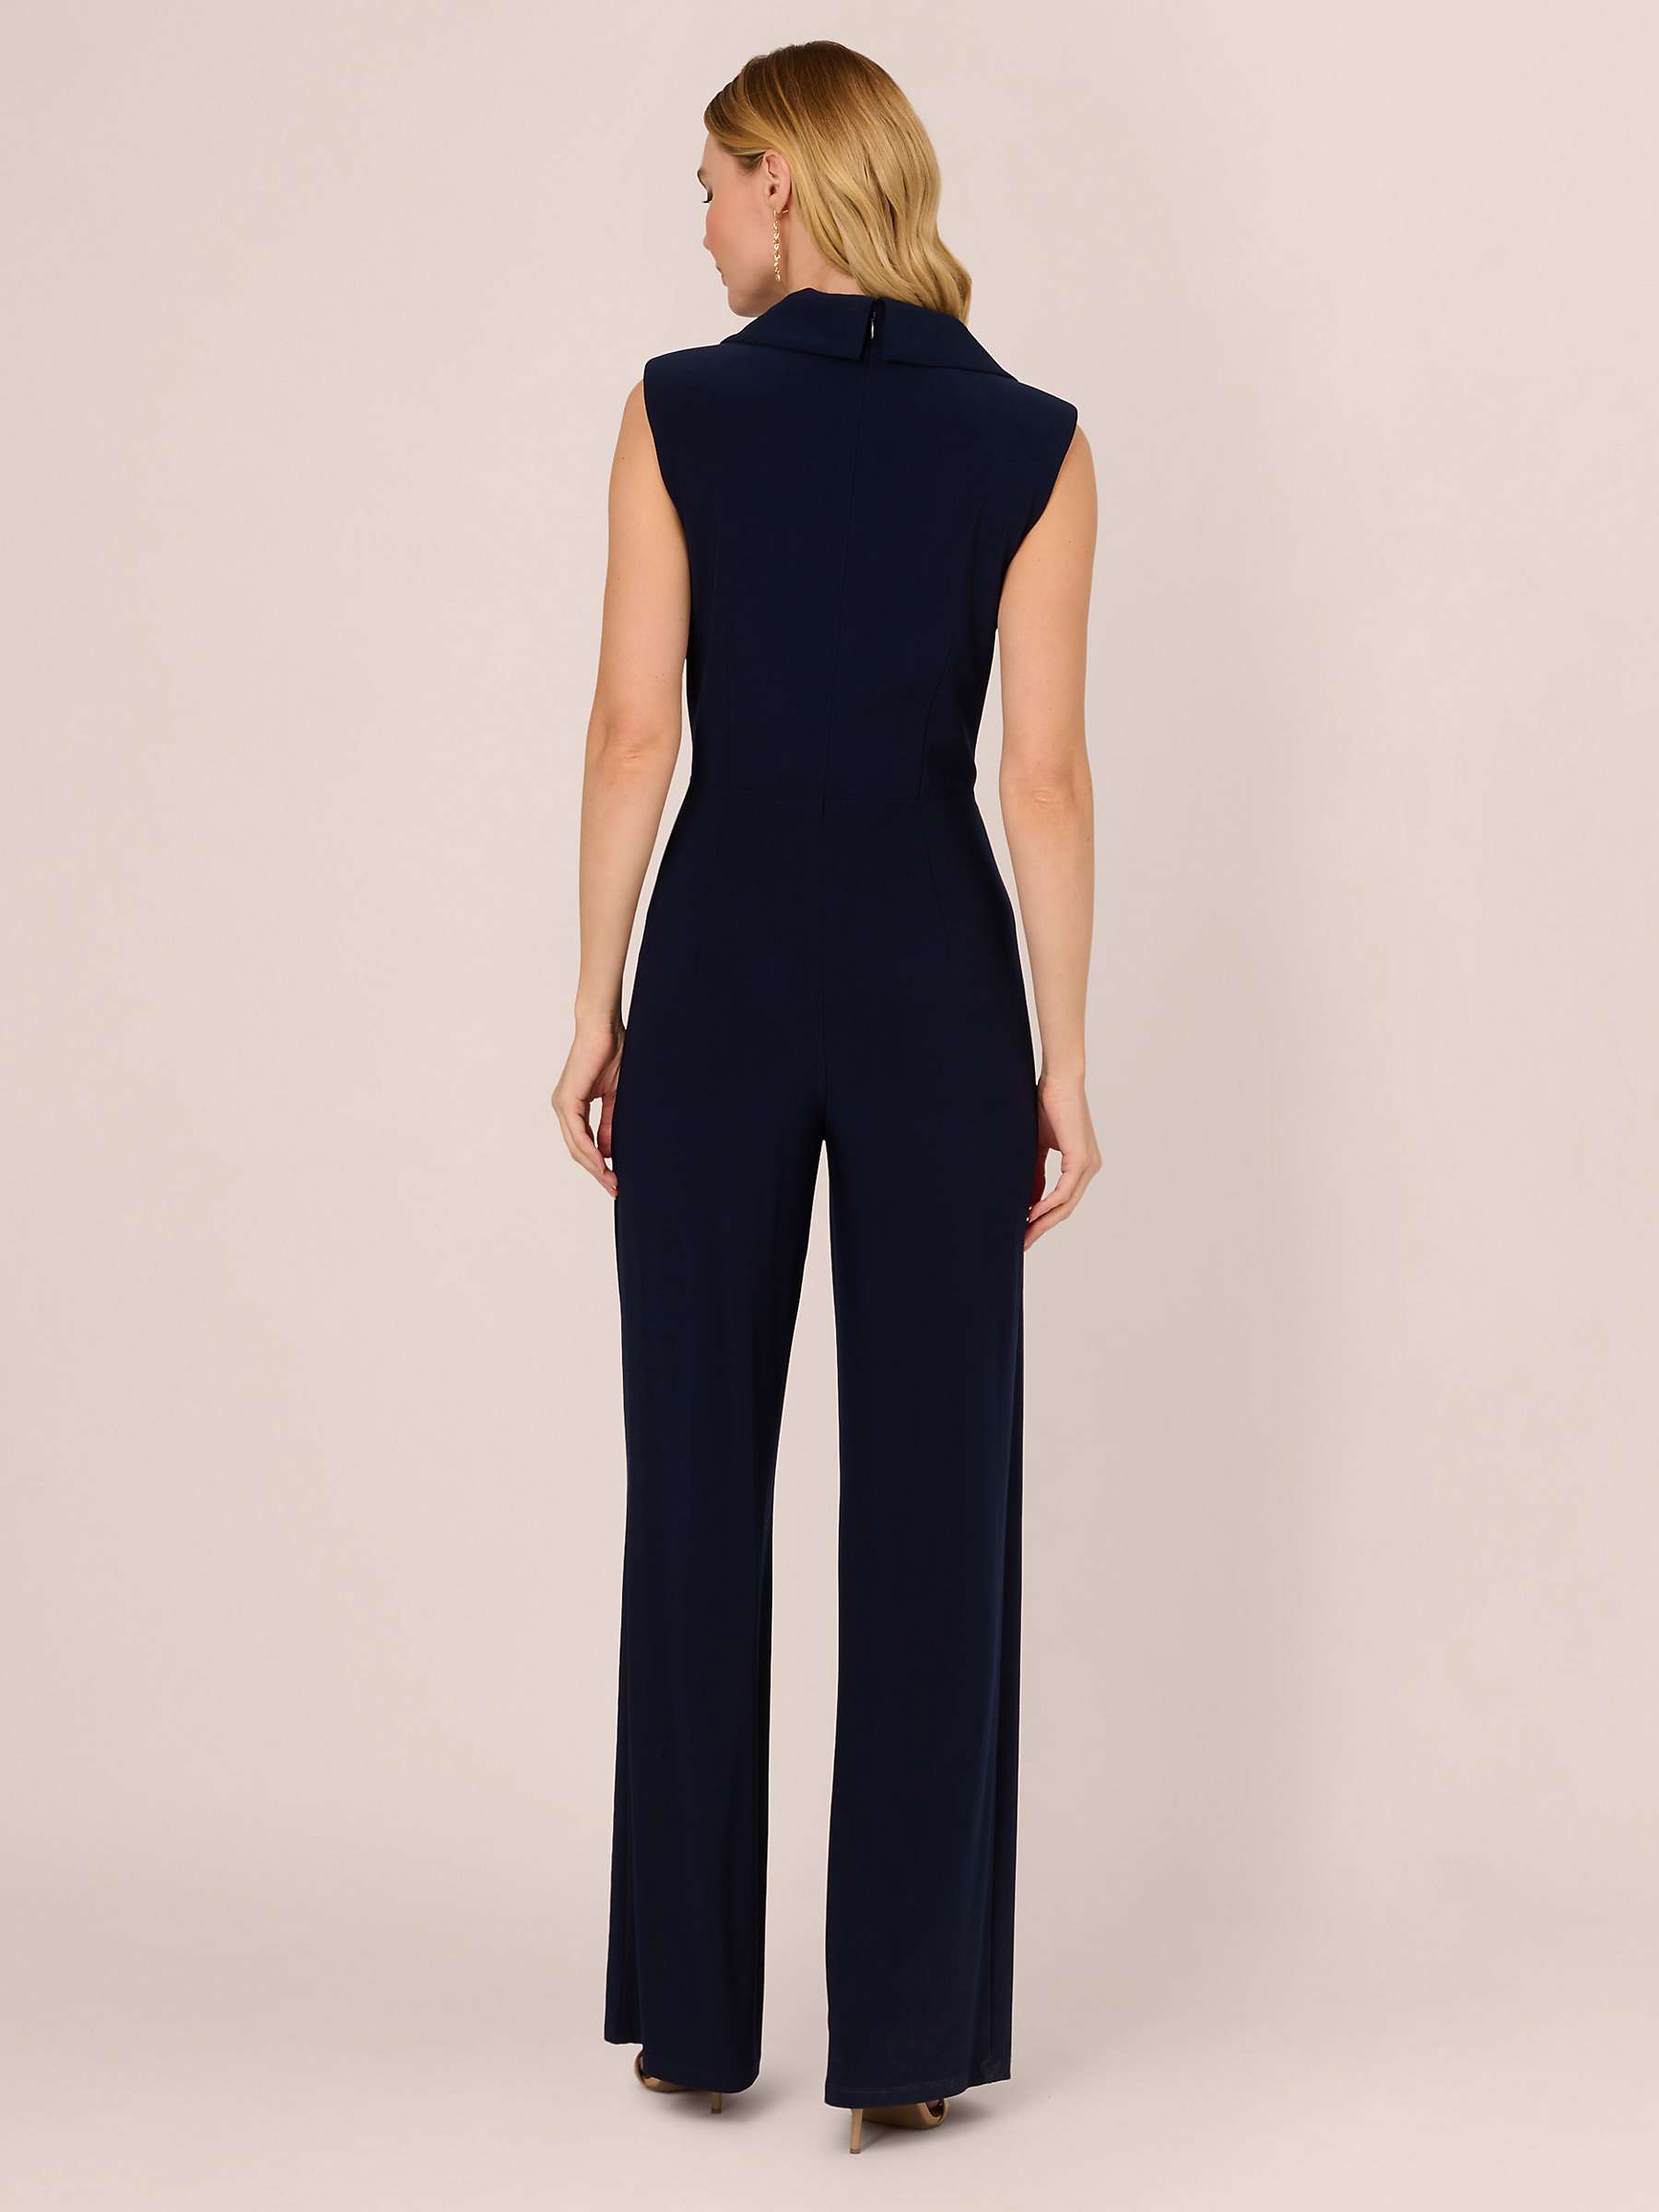 Buy Adrianna Papell Embellished Tuxedo Jersey Jumpsuit, Midnight Online at johnlewis.com